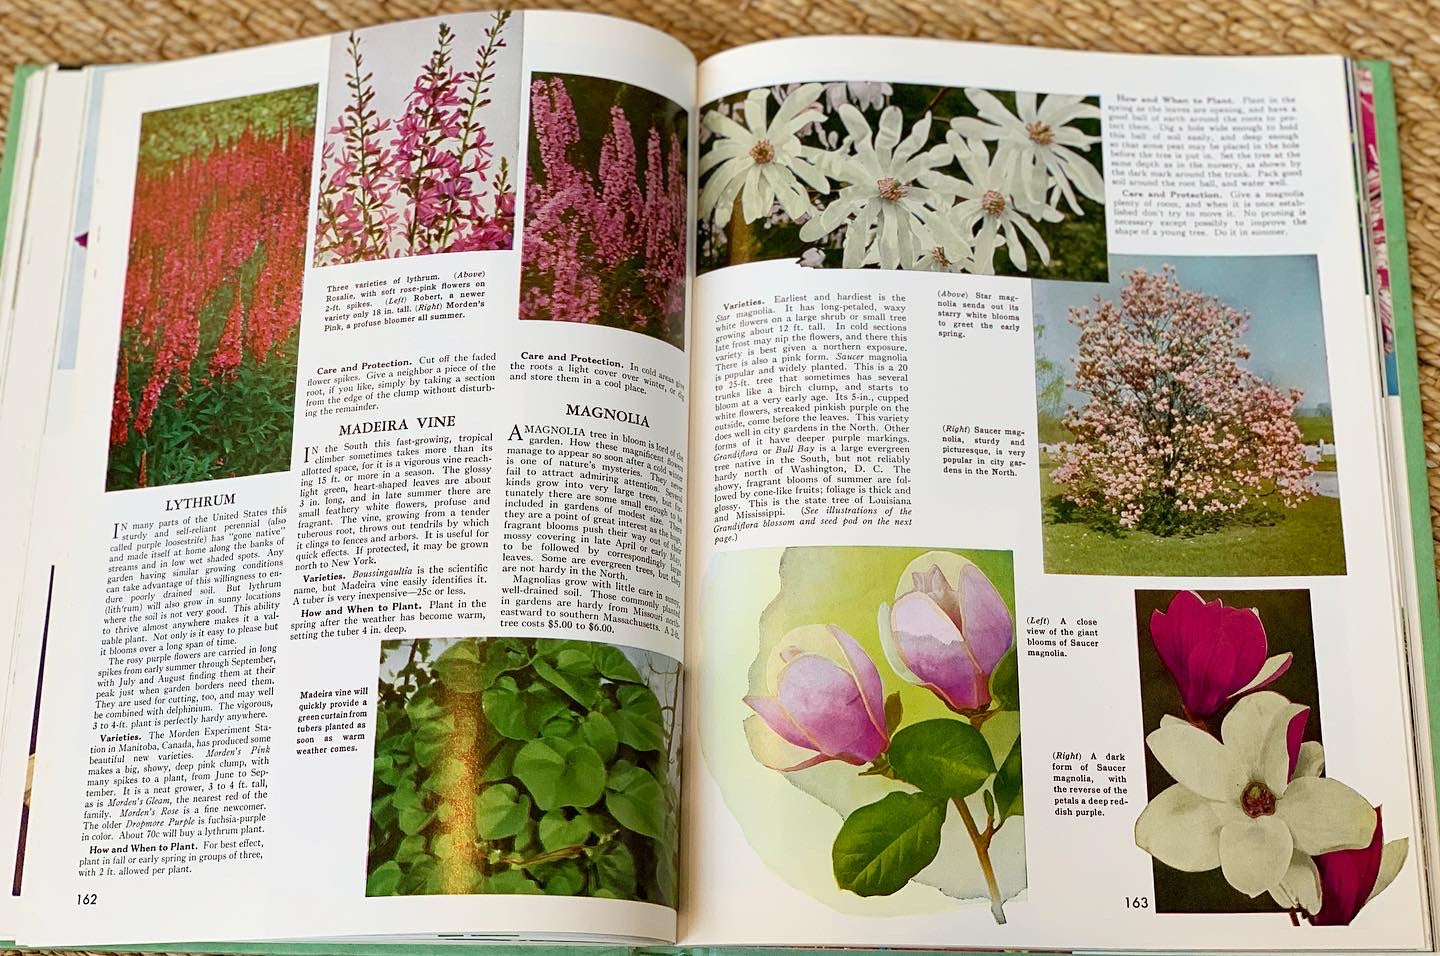 "The Complete Guide to Garden Flowers" (1961)